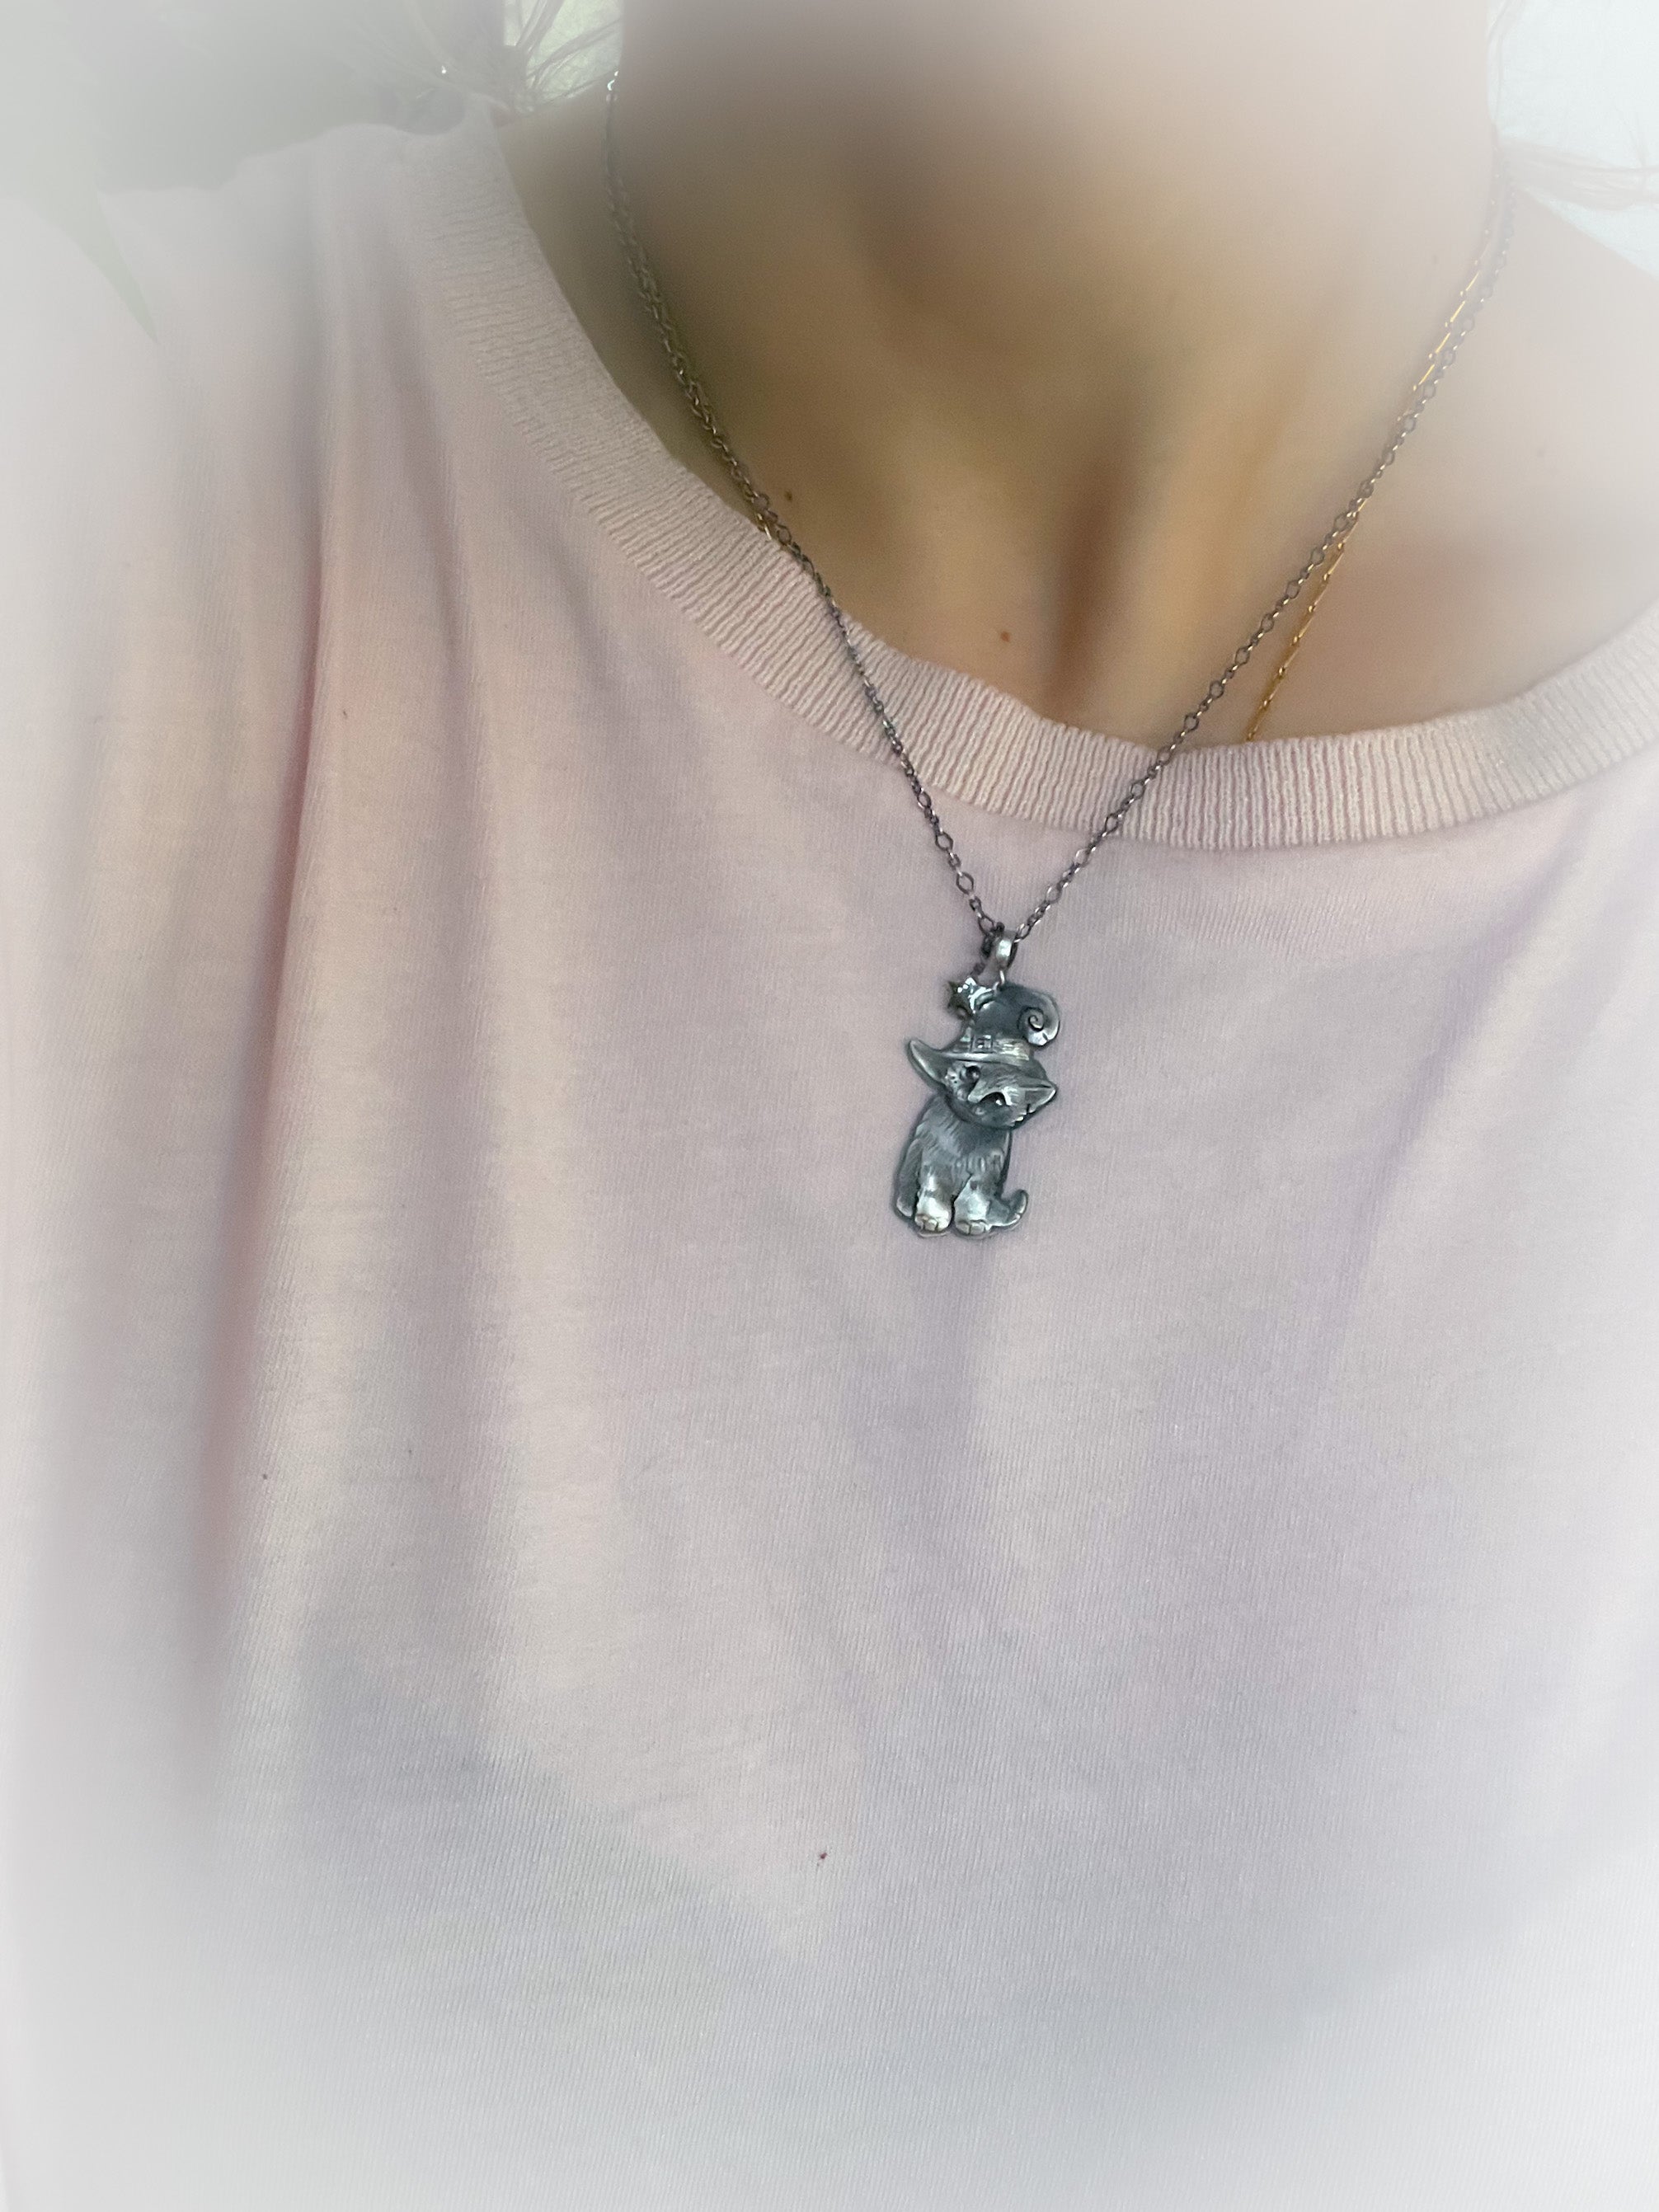 Kitten The Wizard Necklace